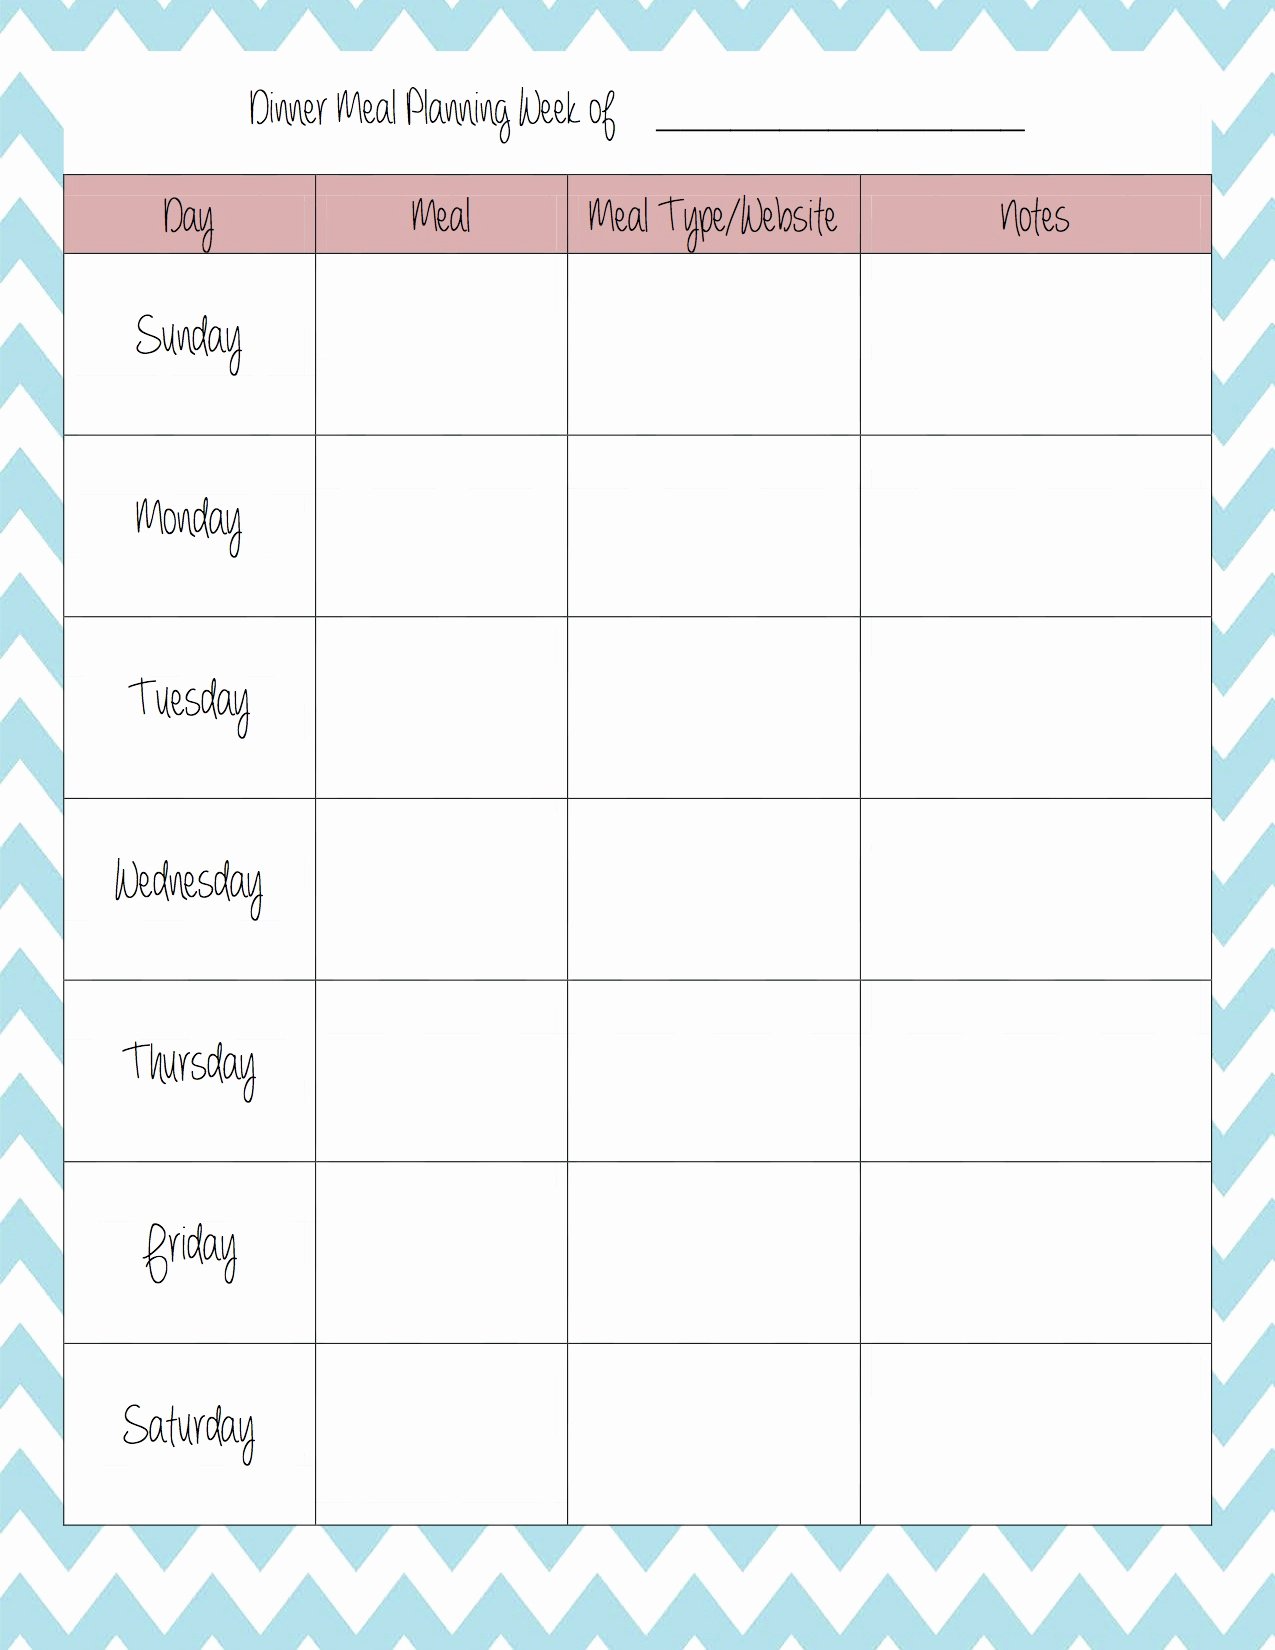 Search Results for “menu Plan Weekly Blank” – Calendar 2015